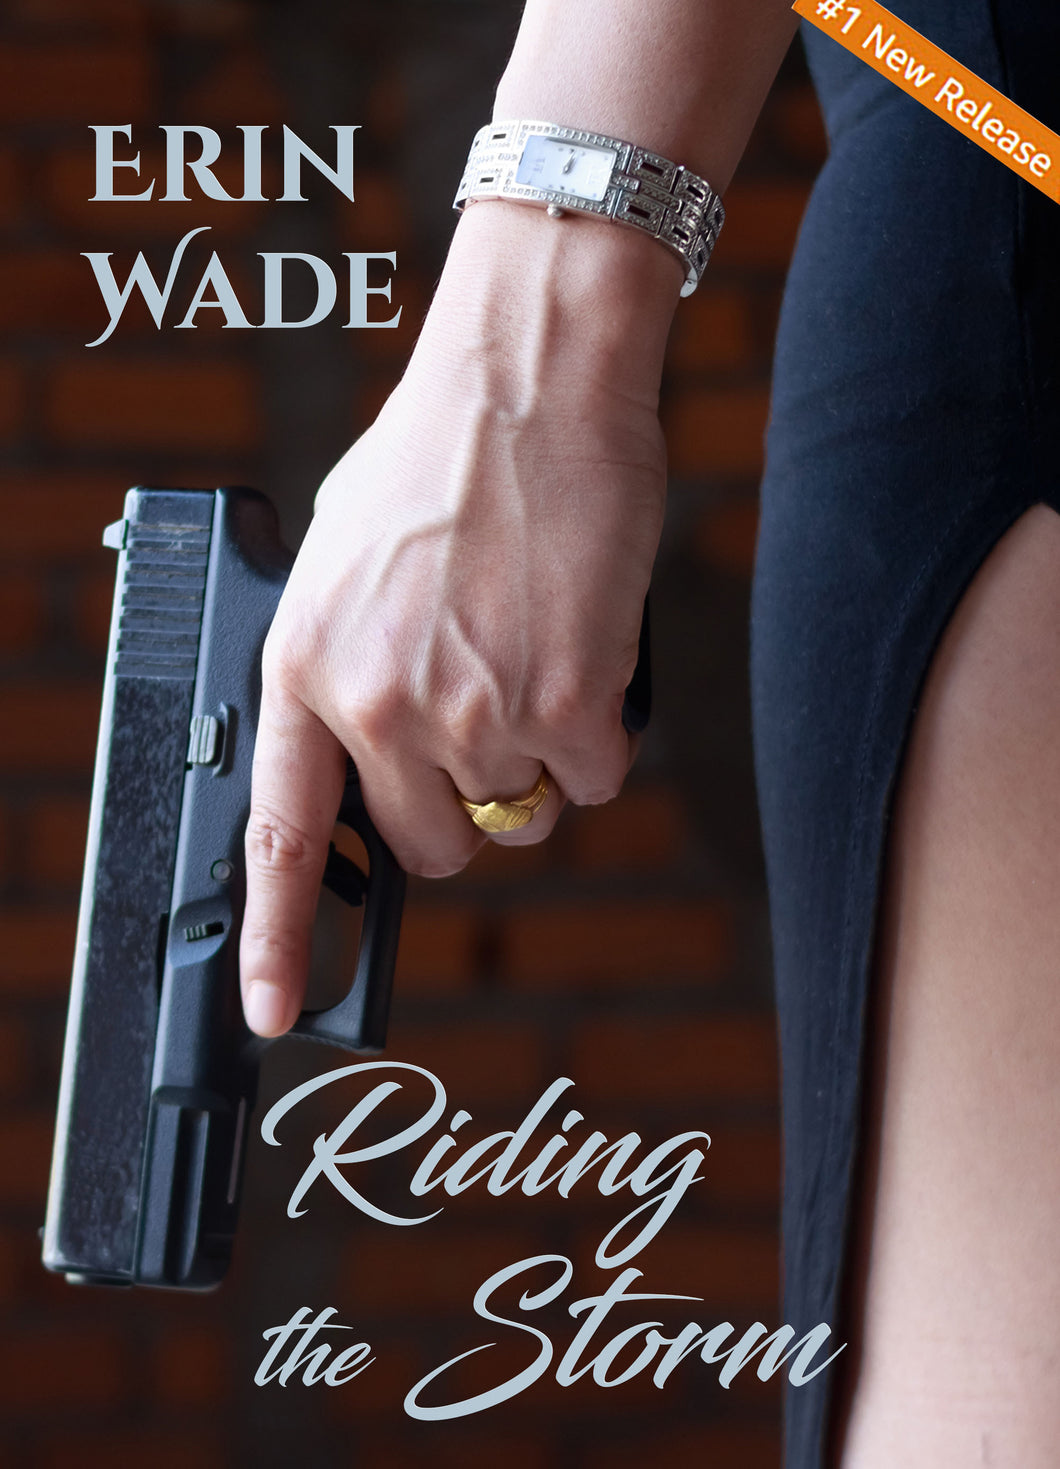 RIDING THE STORM-Paperback - autographed by Erin Wade